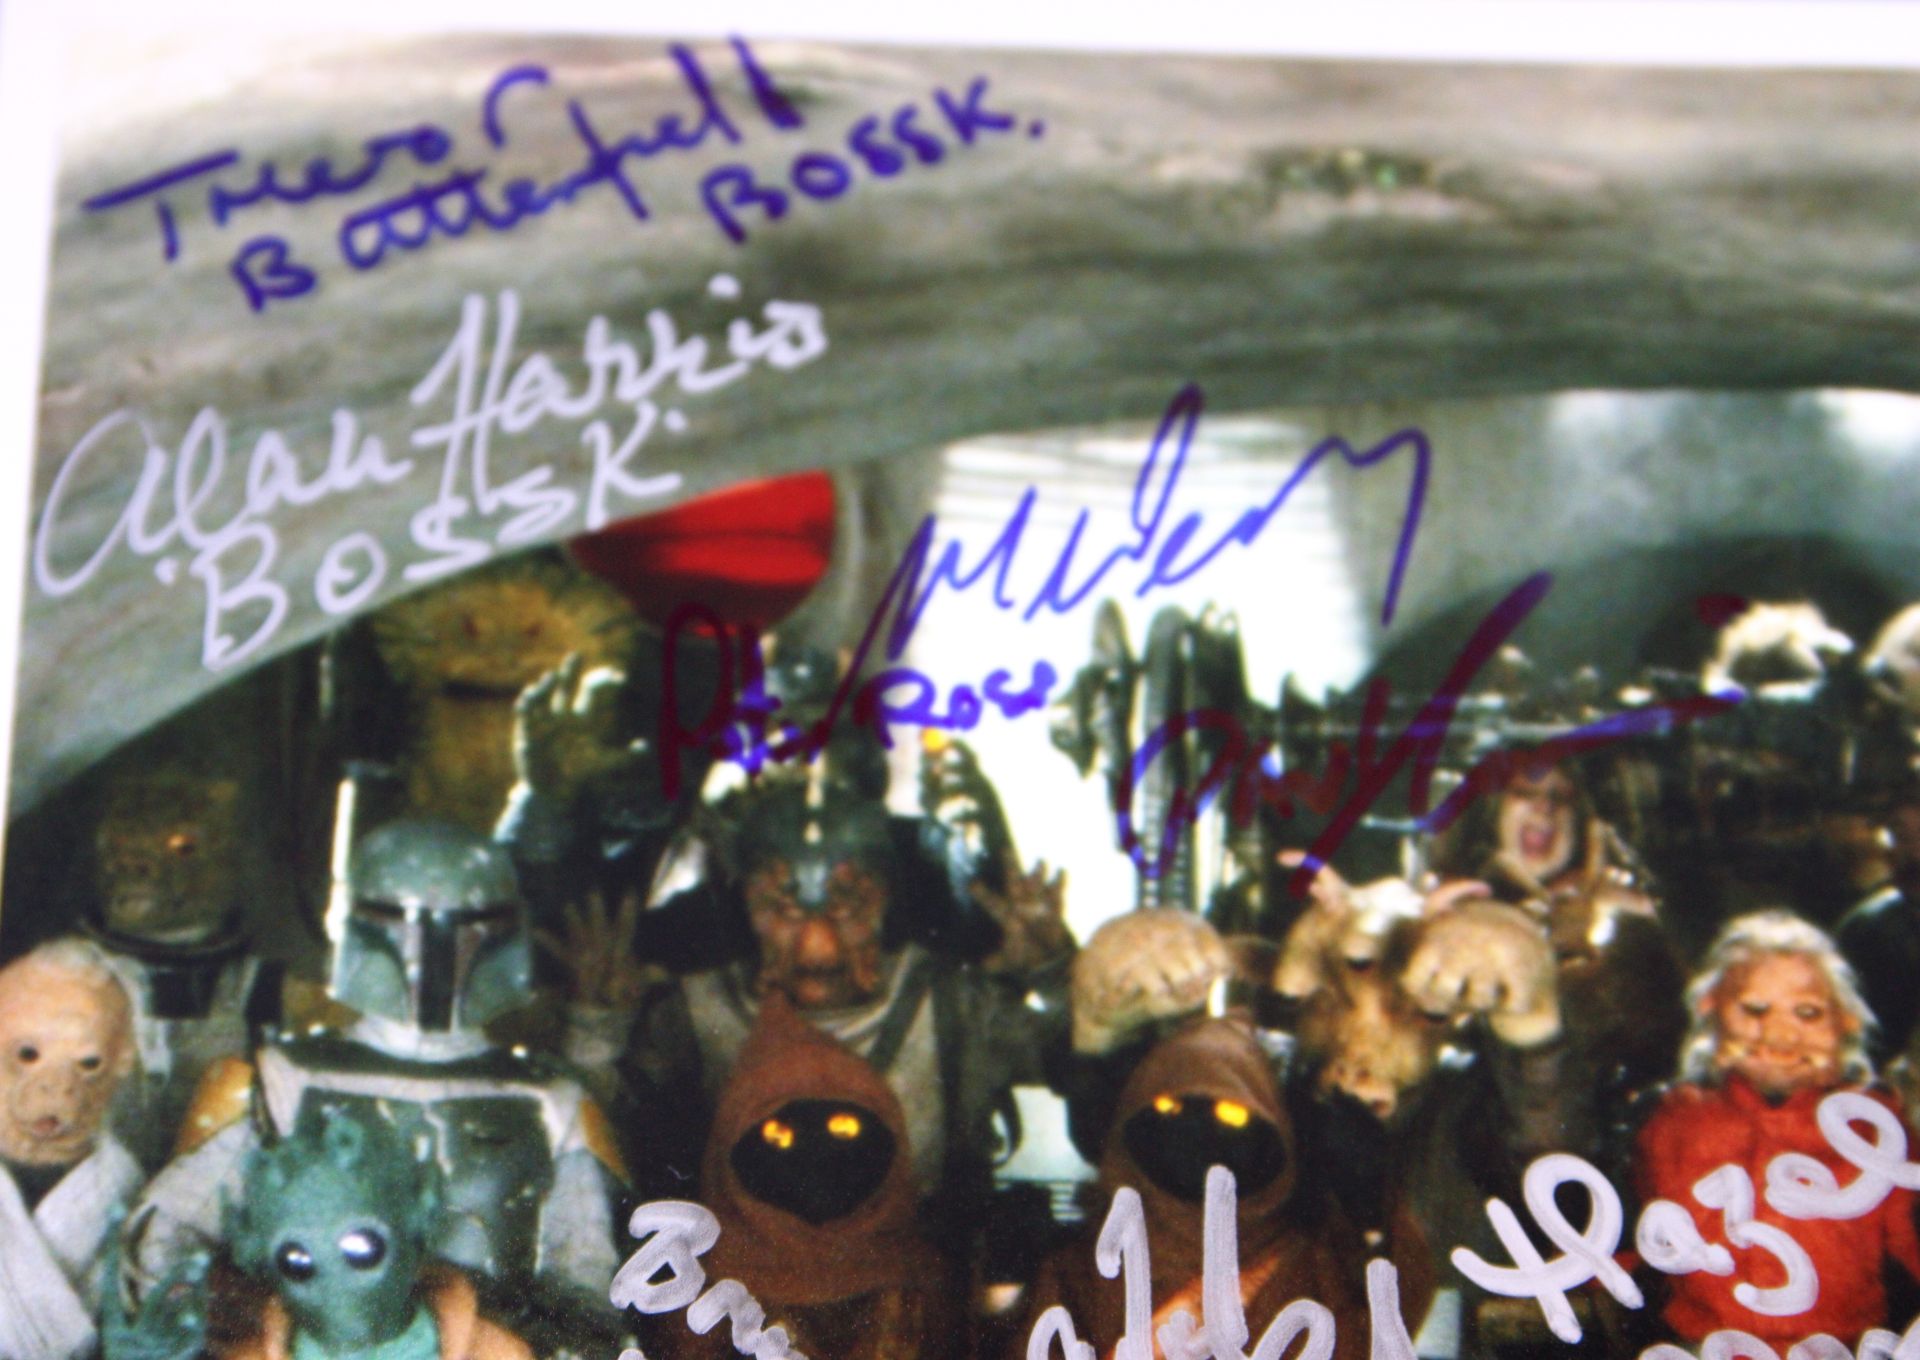 STAR WARS - RETURN OF THE JEDI - JABBA'S PALACE OFFICIAL PIX SIGNED X21 - Image 2 of 5